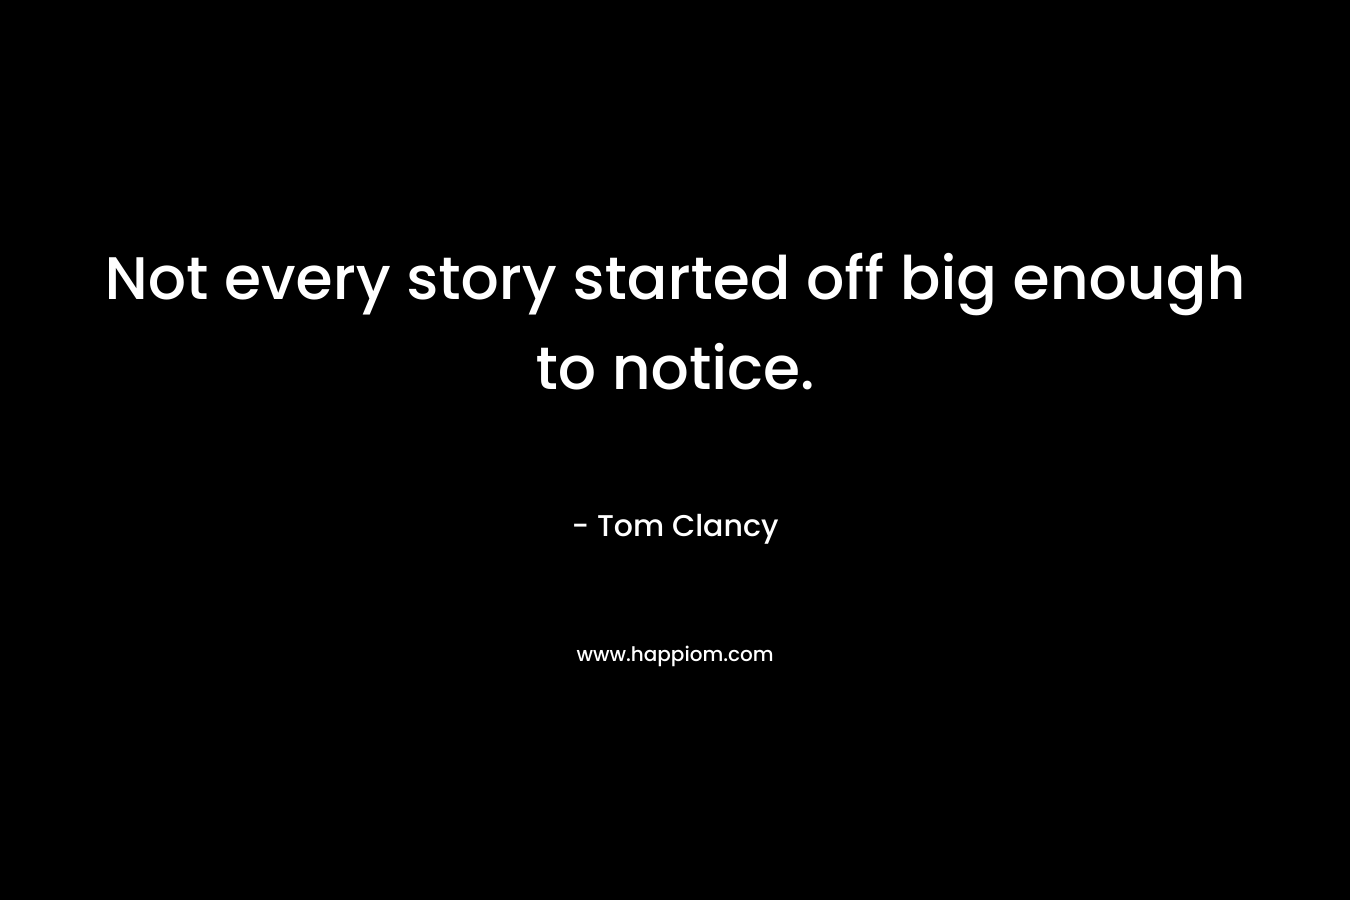 Not every story started off big enough to notice.